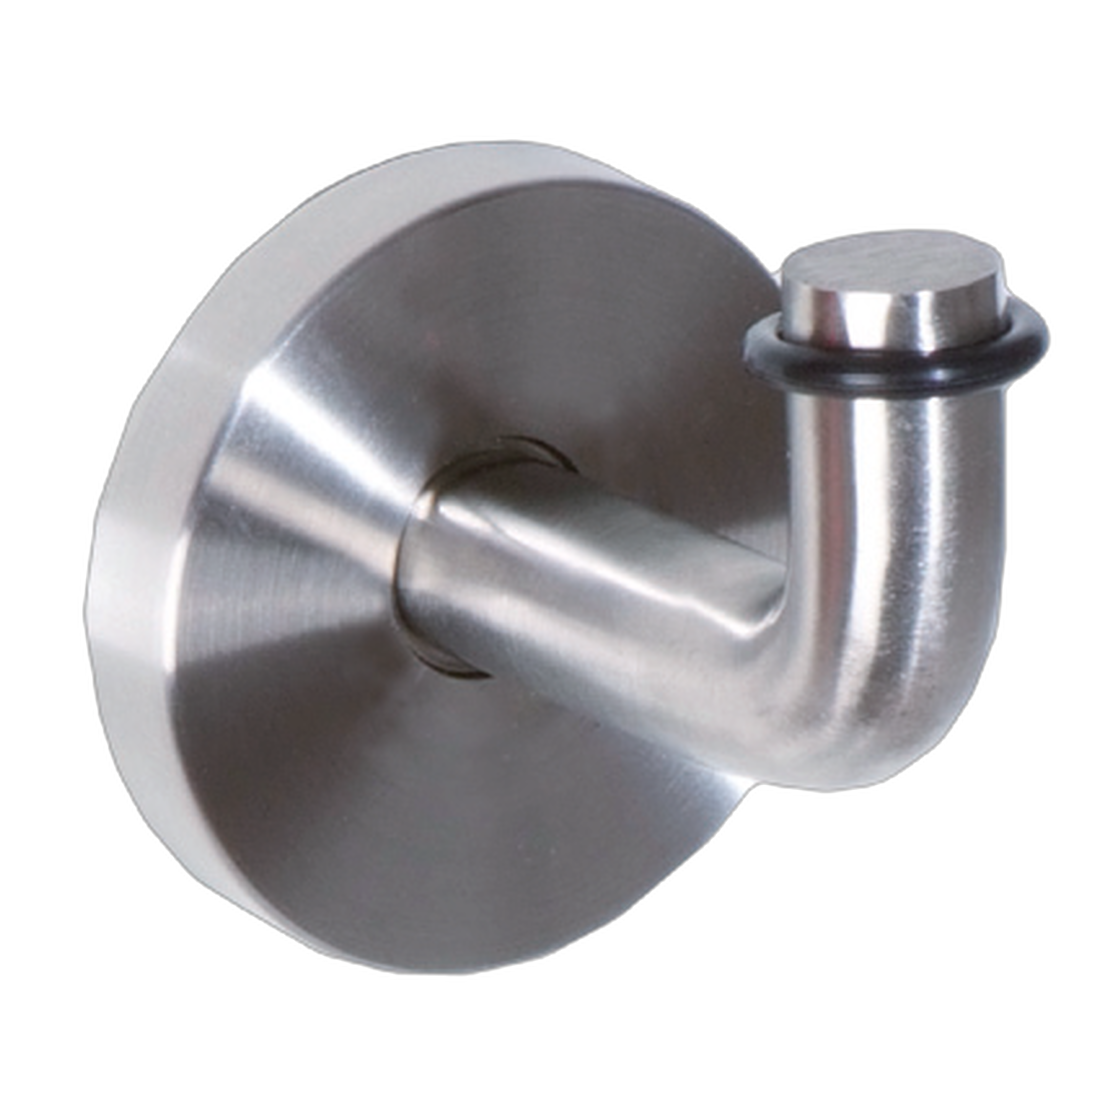 Door stopper, curved hook ø 12mm, mounting plate